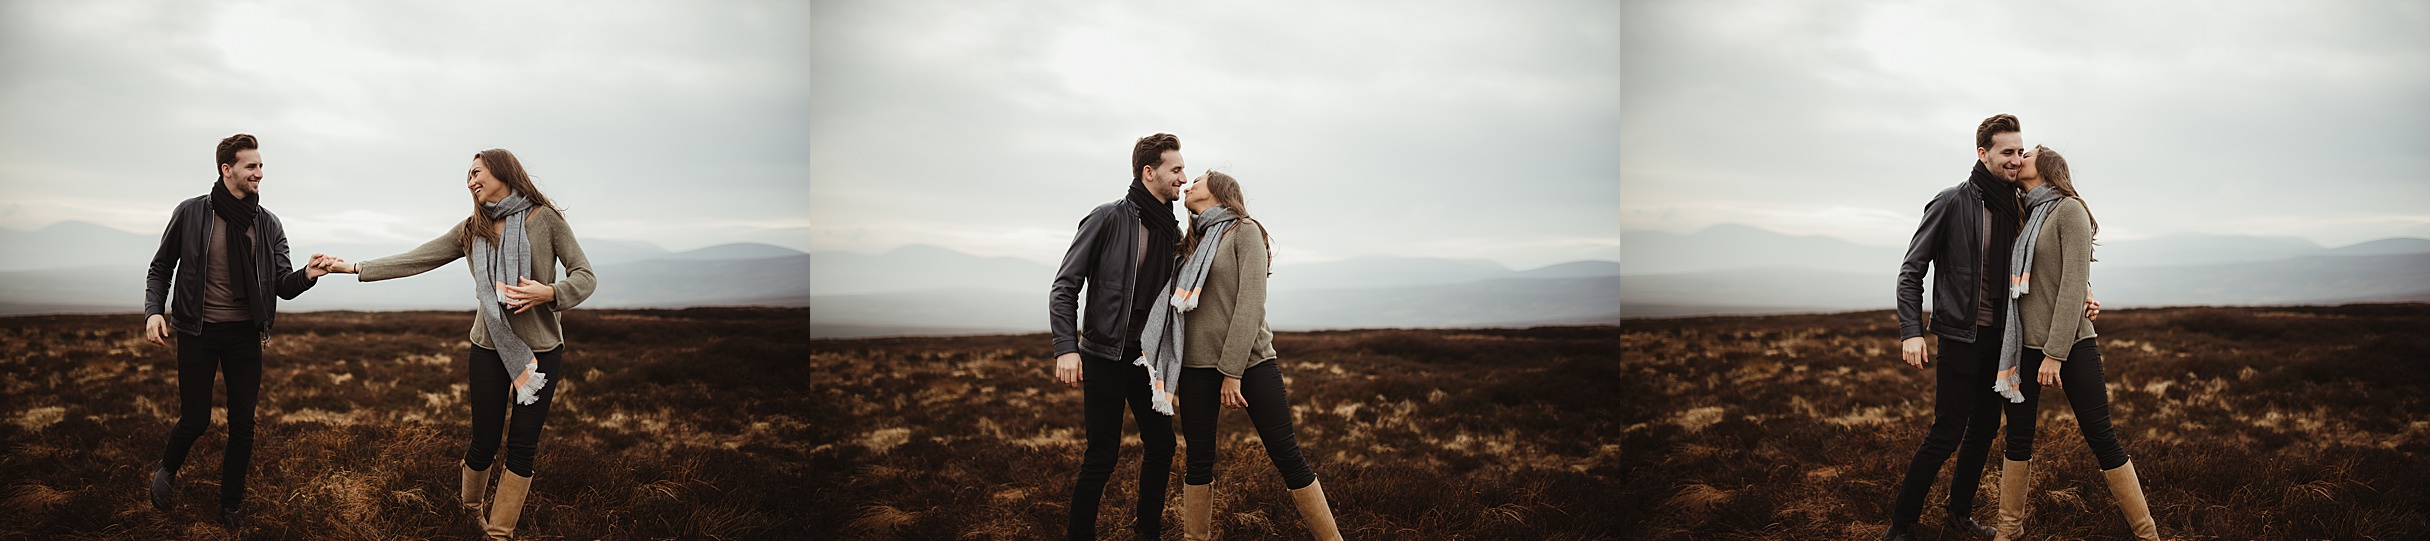 Wicklow-Mountains-Engagement-Dublin-Photographer-Session-54.jpg